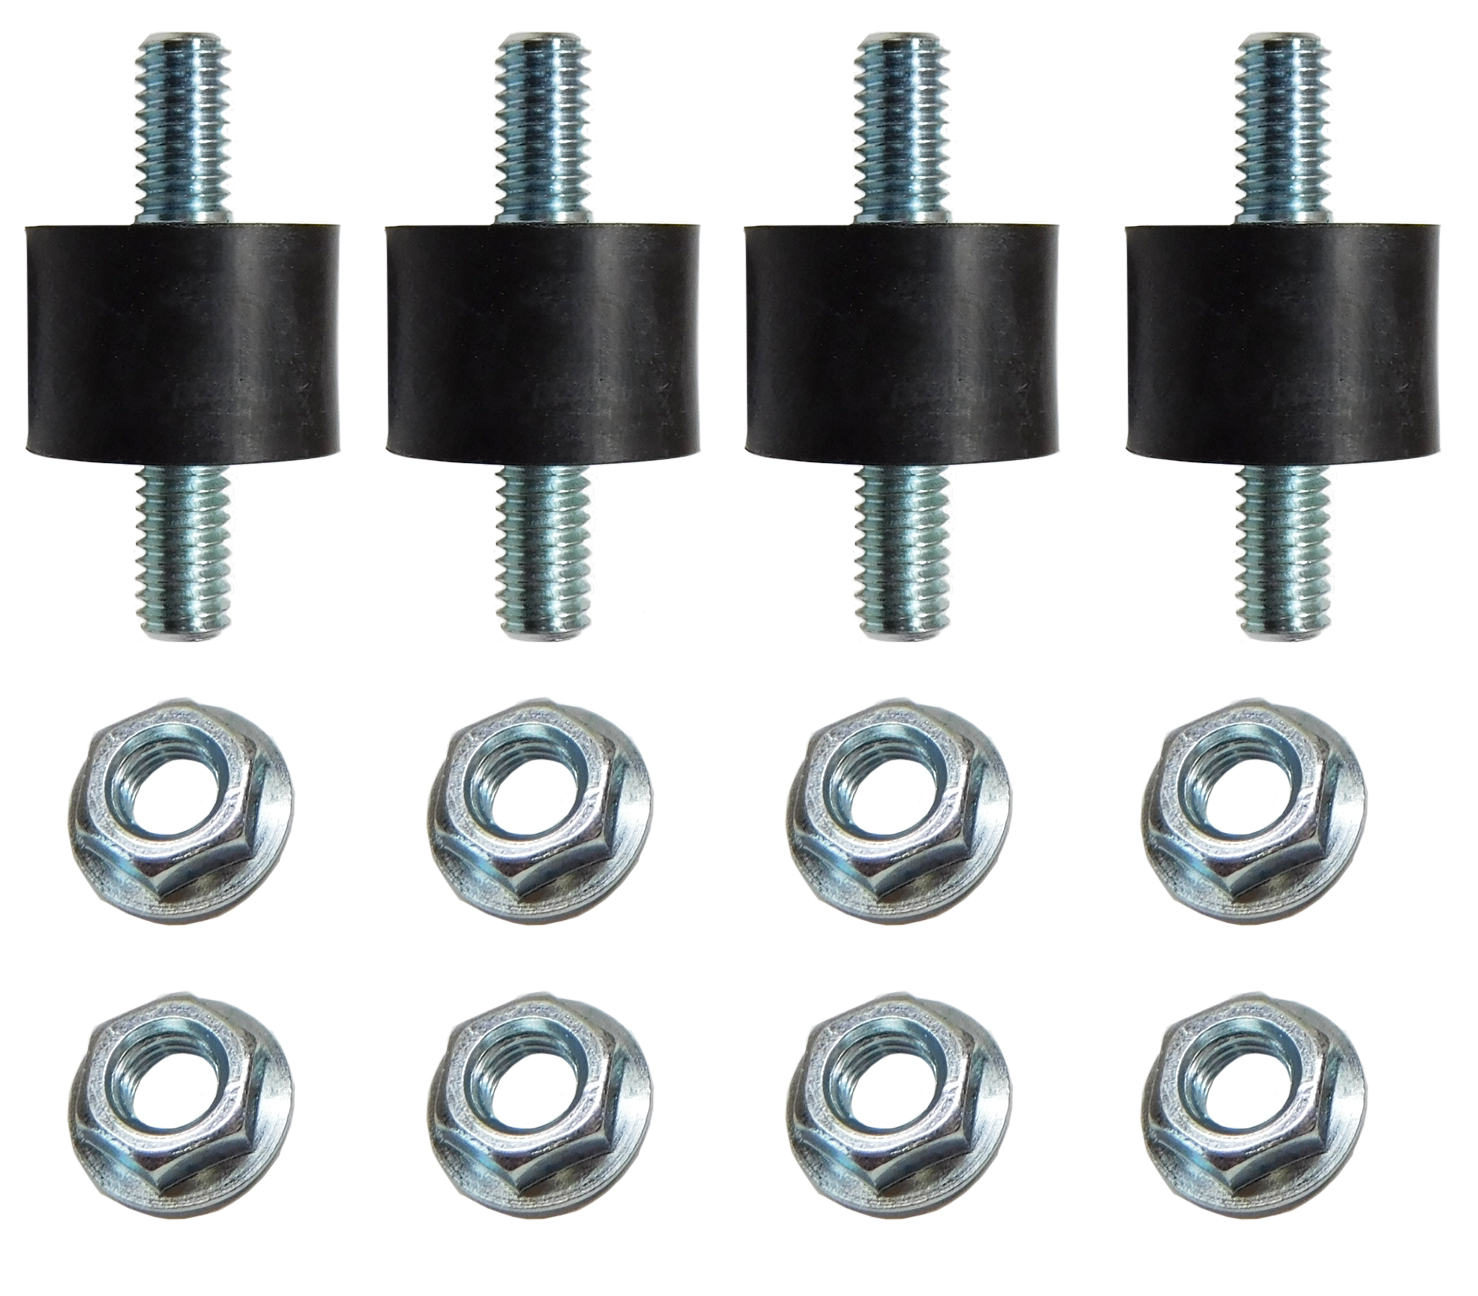 1964 Buick Skylark/GS/Regal/GN AIR CONDITIONING MOUNTING STUD INSULATOR (THIS IS THE 3/4'' ROUND RUBBER INSULATOR WITH A 5/16'' STUD ON EACH END) - KIT (4 PIECE) | AC1234Z